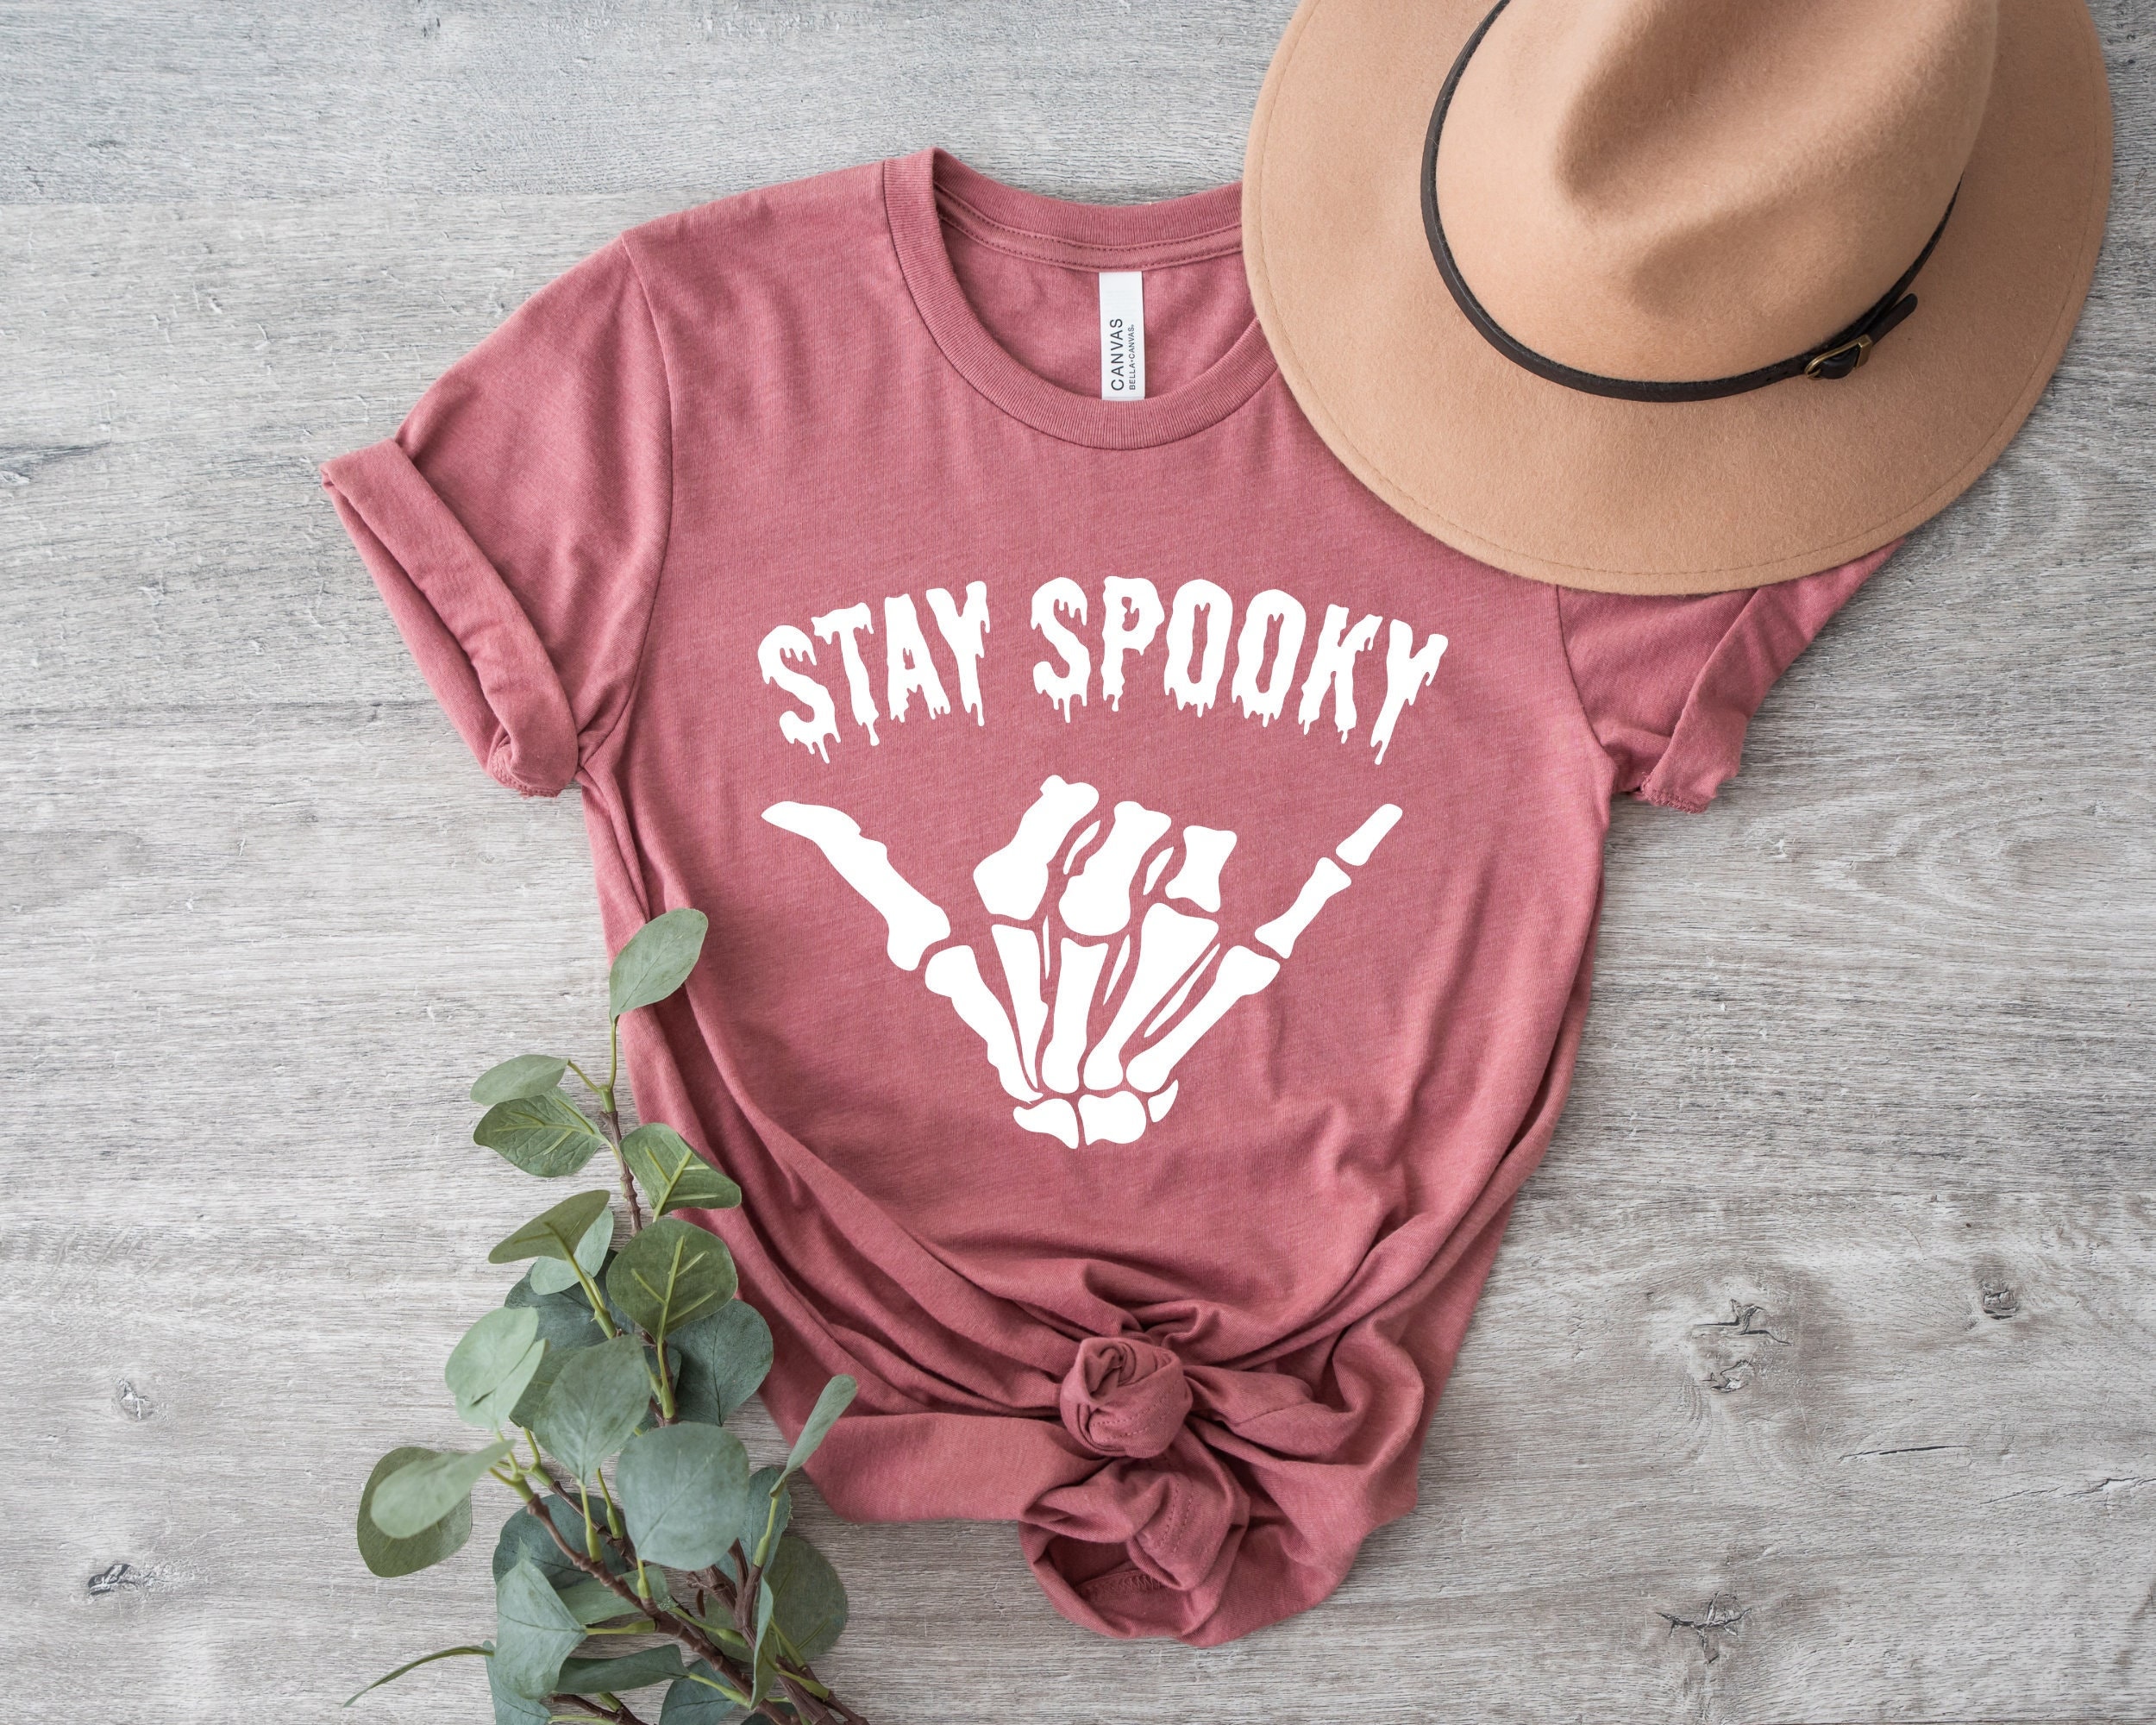 Stay Spooky Shirt, Spooky Season, Witches, Halloween Shirt, Halloween Vibes, Halloween retro shirt, Retro Shirt, Spooky Shirt, Vibes Shirt